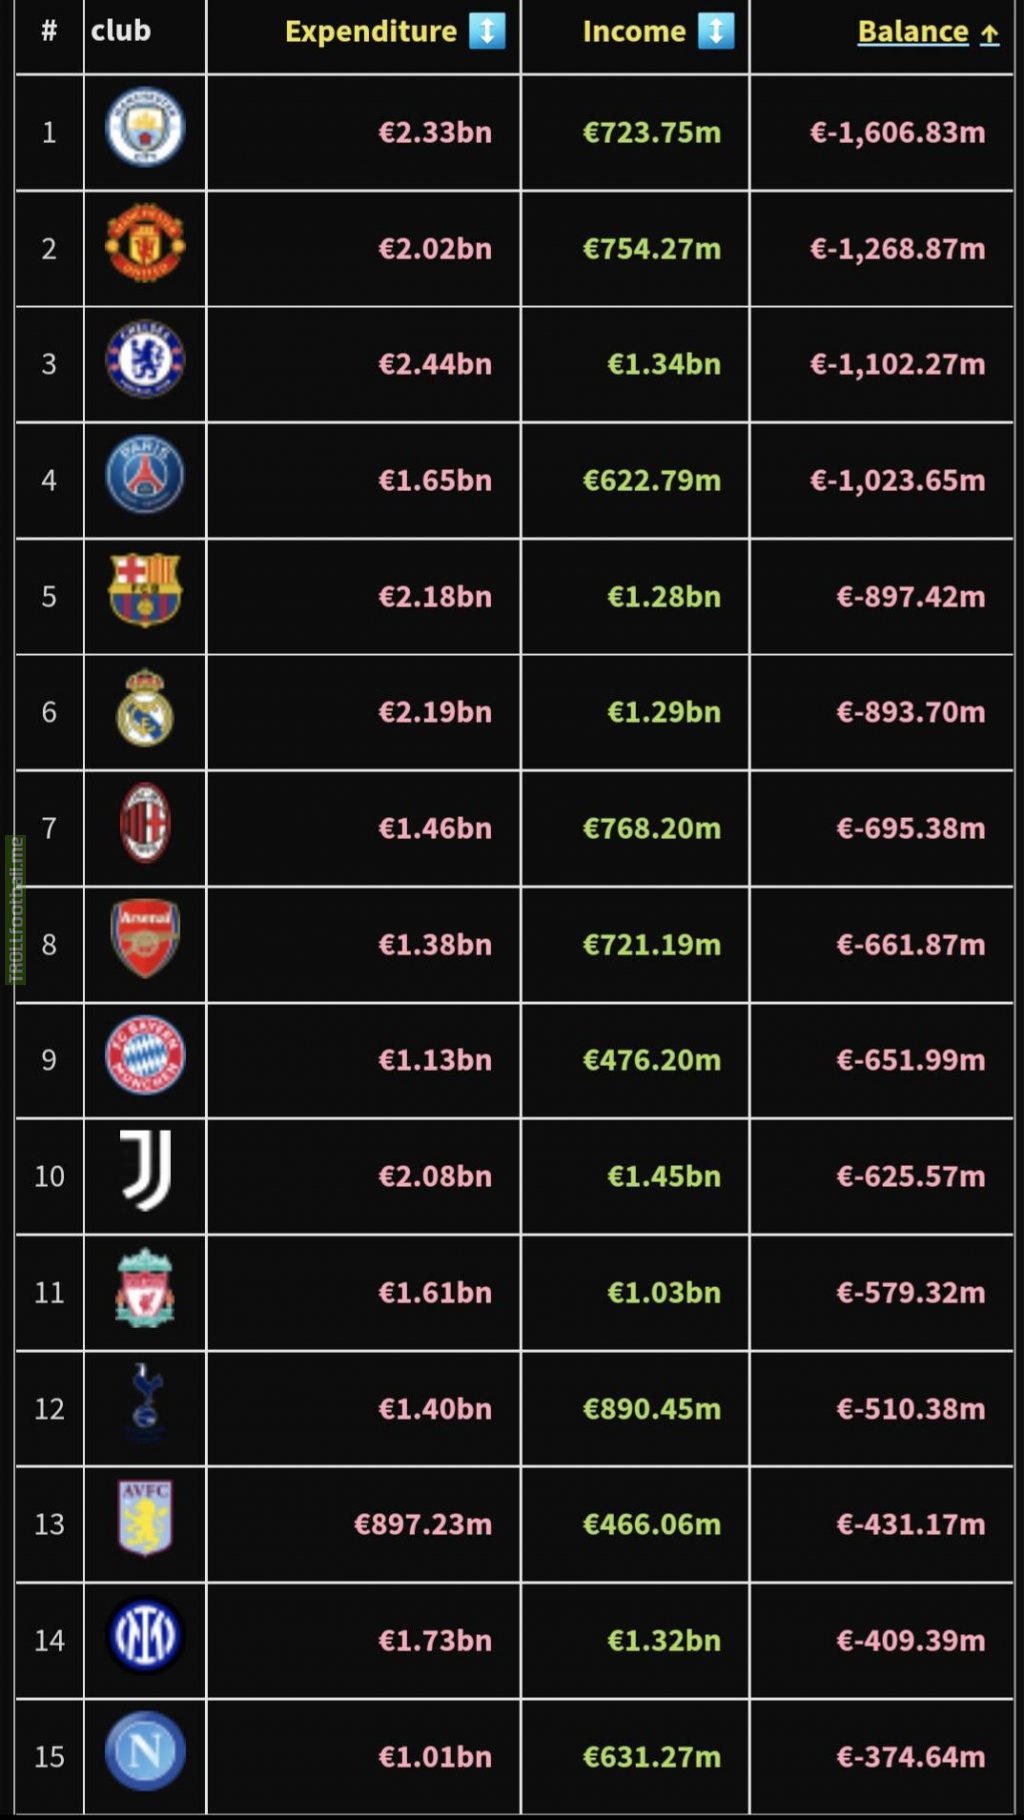 TRANSFER INCOME AND EXPENDITURE those stats indicate who has the worst net balance in transfers in the 21st century. Source: Transfermarkt